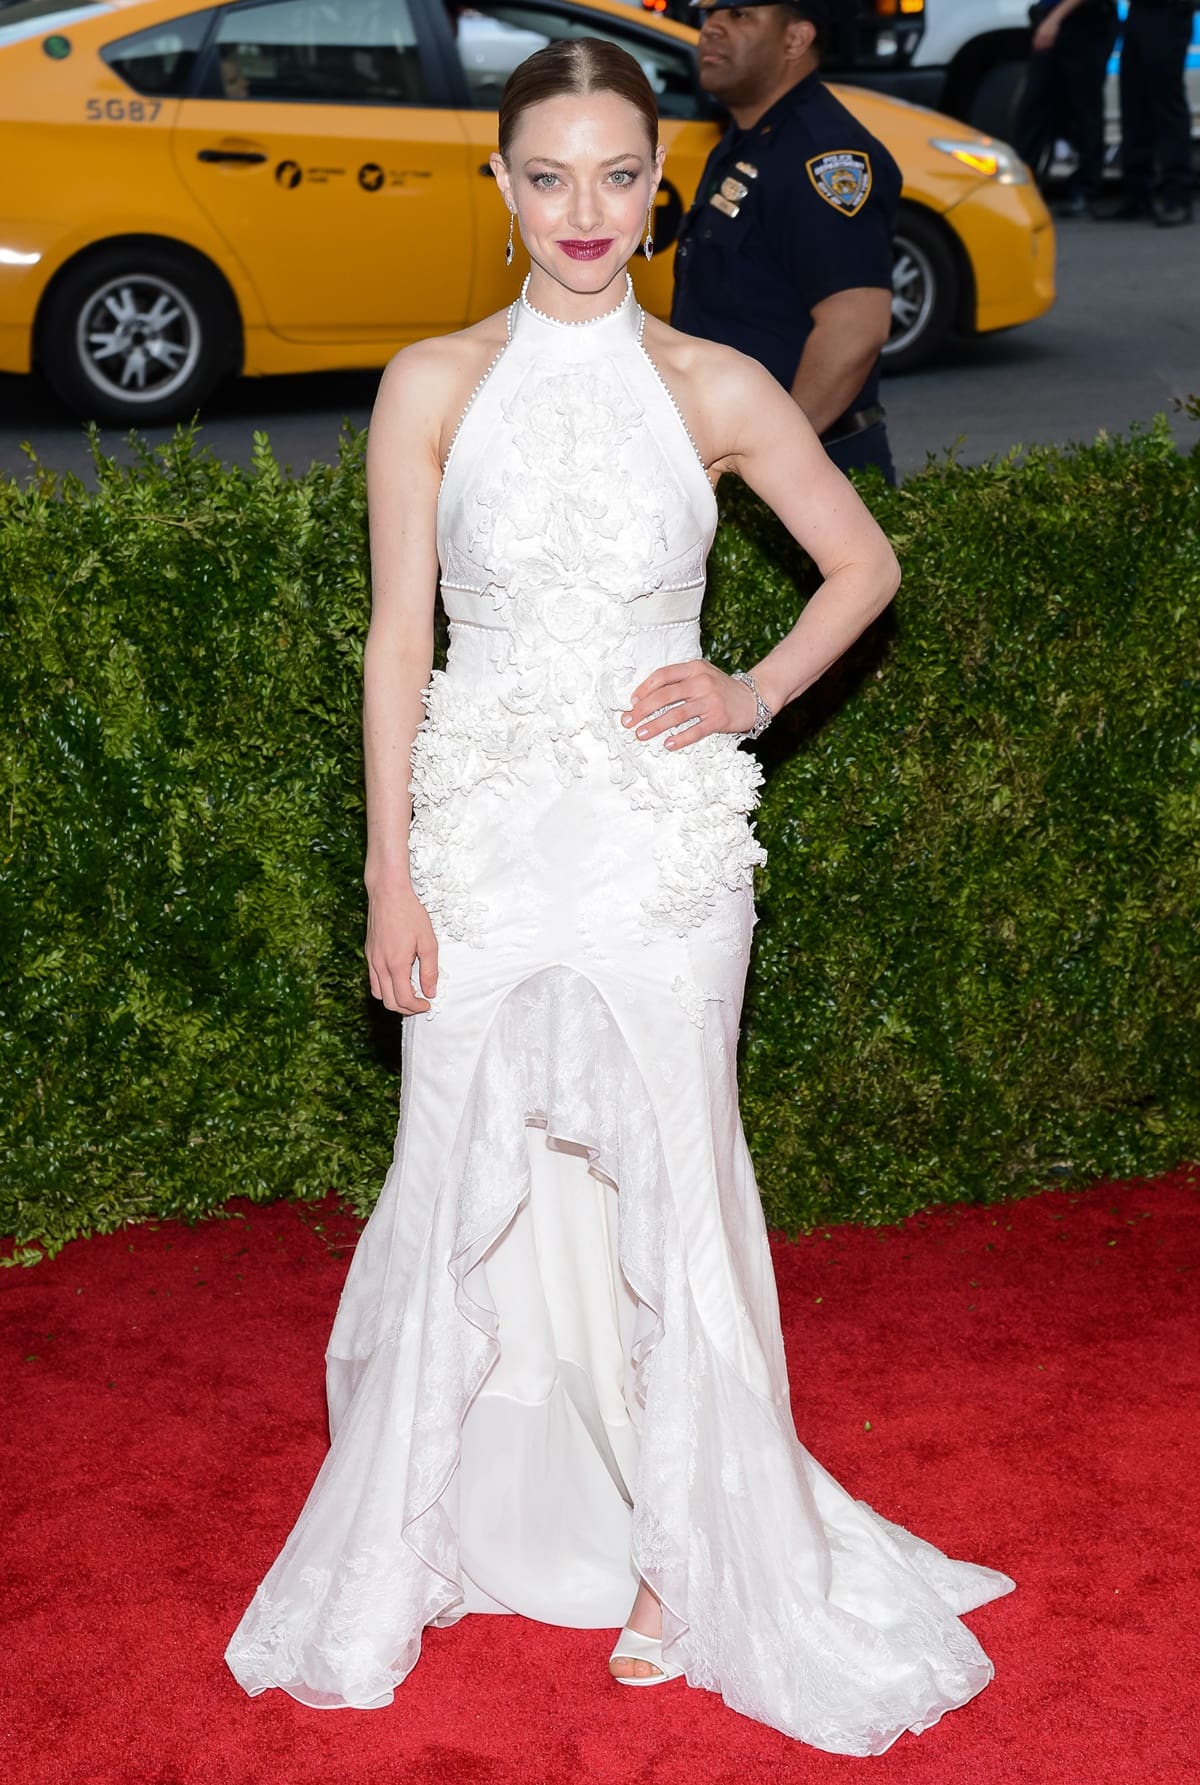 Amanda Seyfried graced the 2015 Met Gala red carpet in a stunning white Givenchy Couture halter-neck dress at the 'China: Through The Looking Glass' Costume Institute Benefit Gala at the Metropolitan Museum of Art